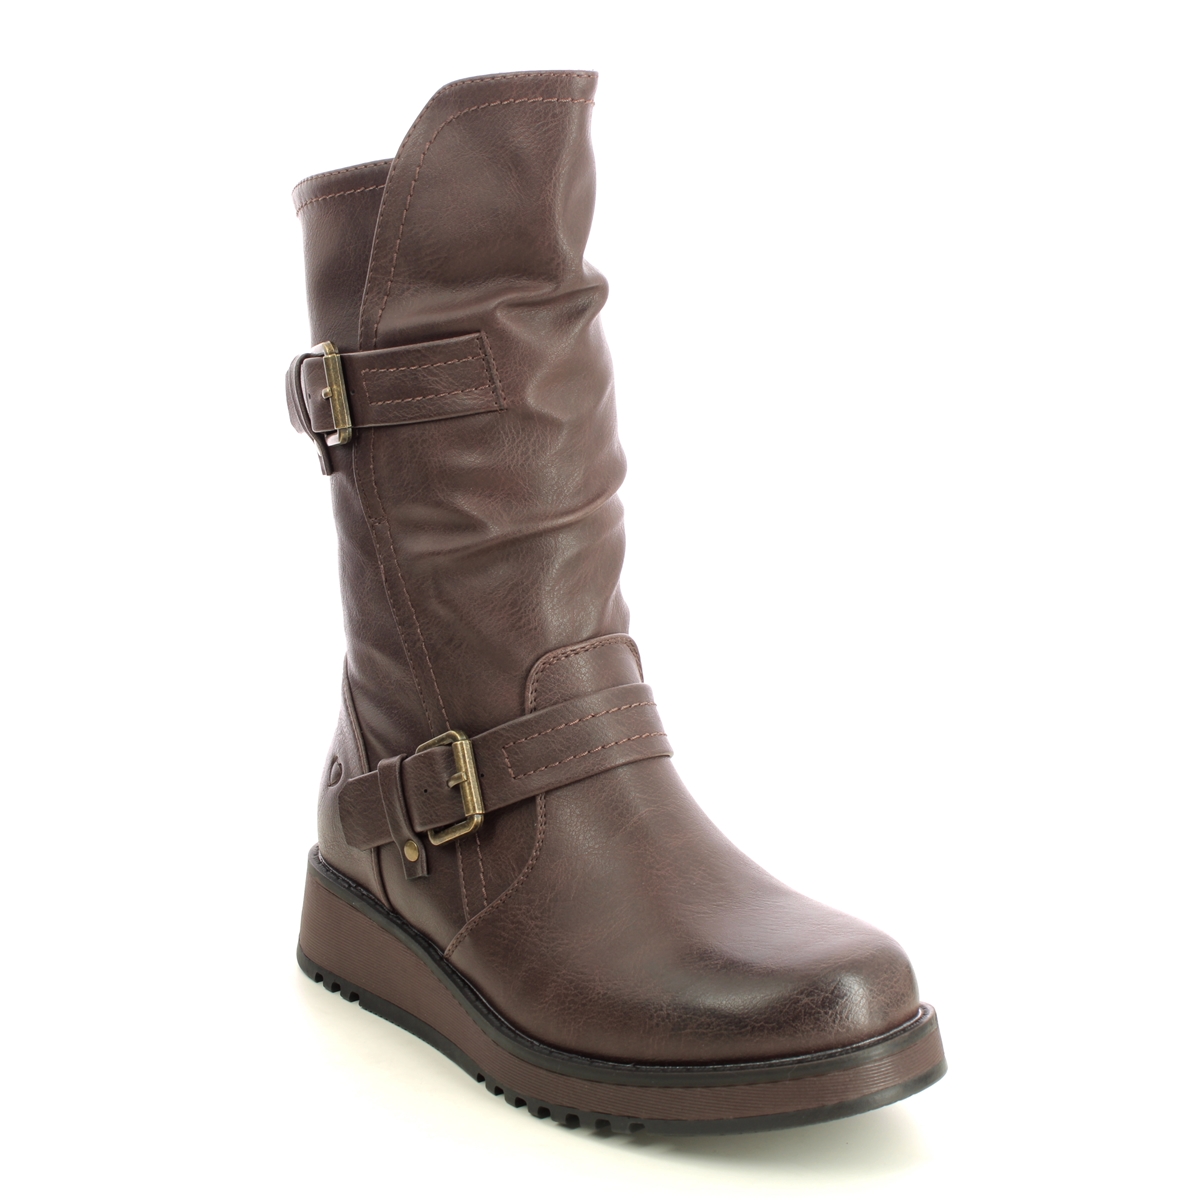 Heavenly Feet Hannah 4 Chocolate Brown Womens Mid Calf Boots 3507-27 In Size 8 In Plain Chocolate Brown